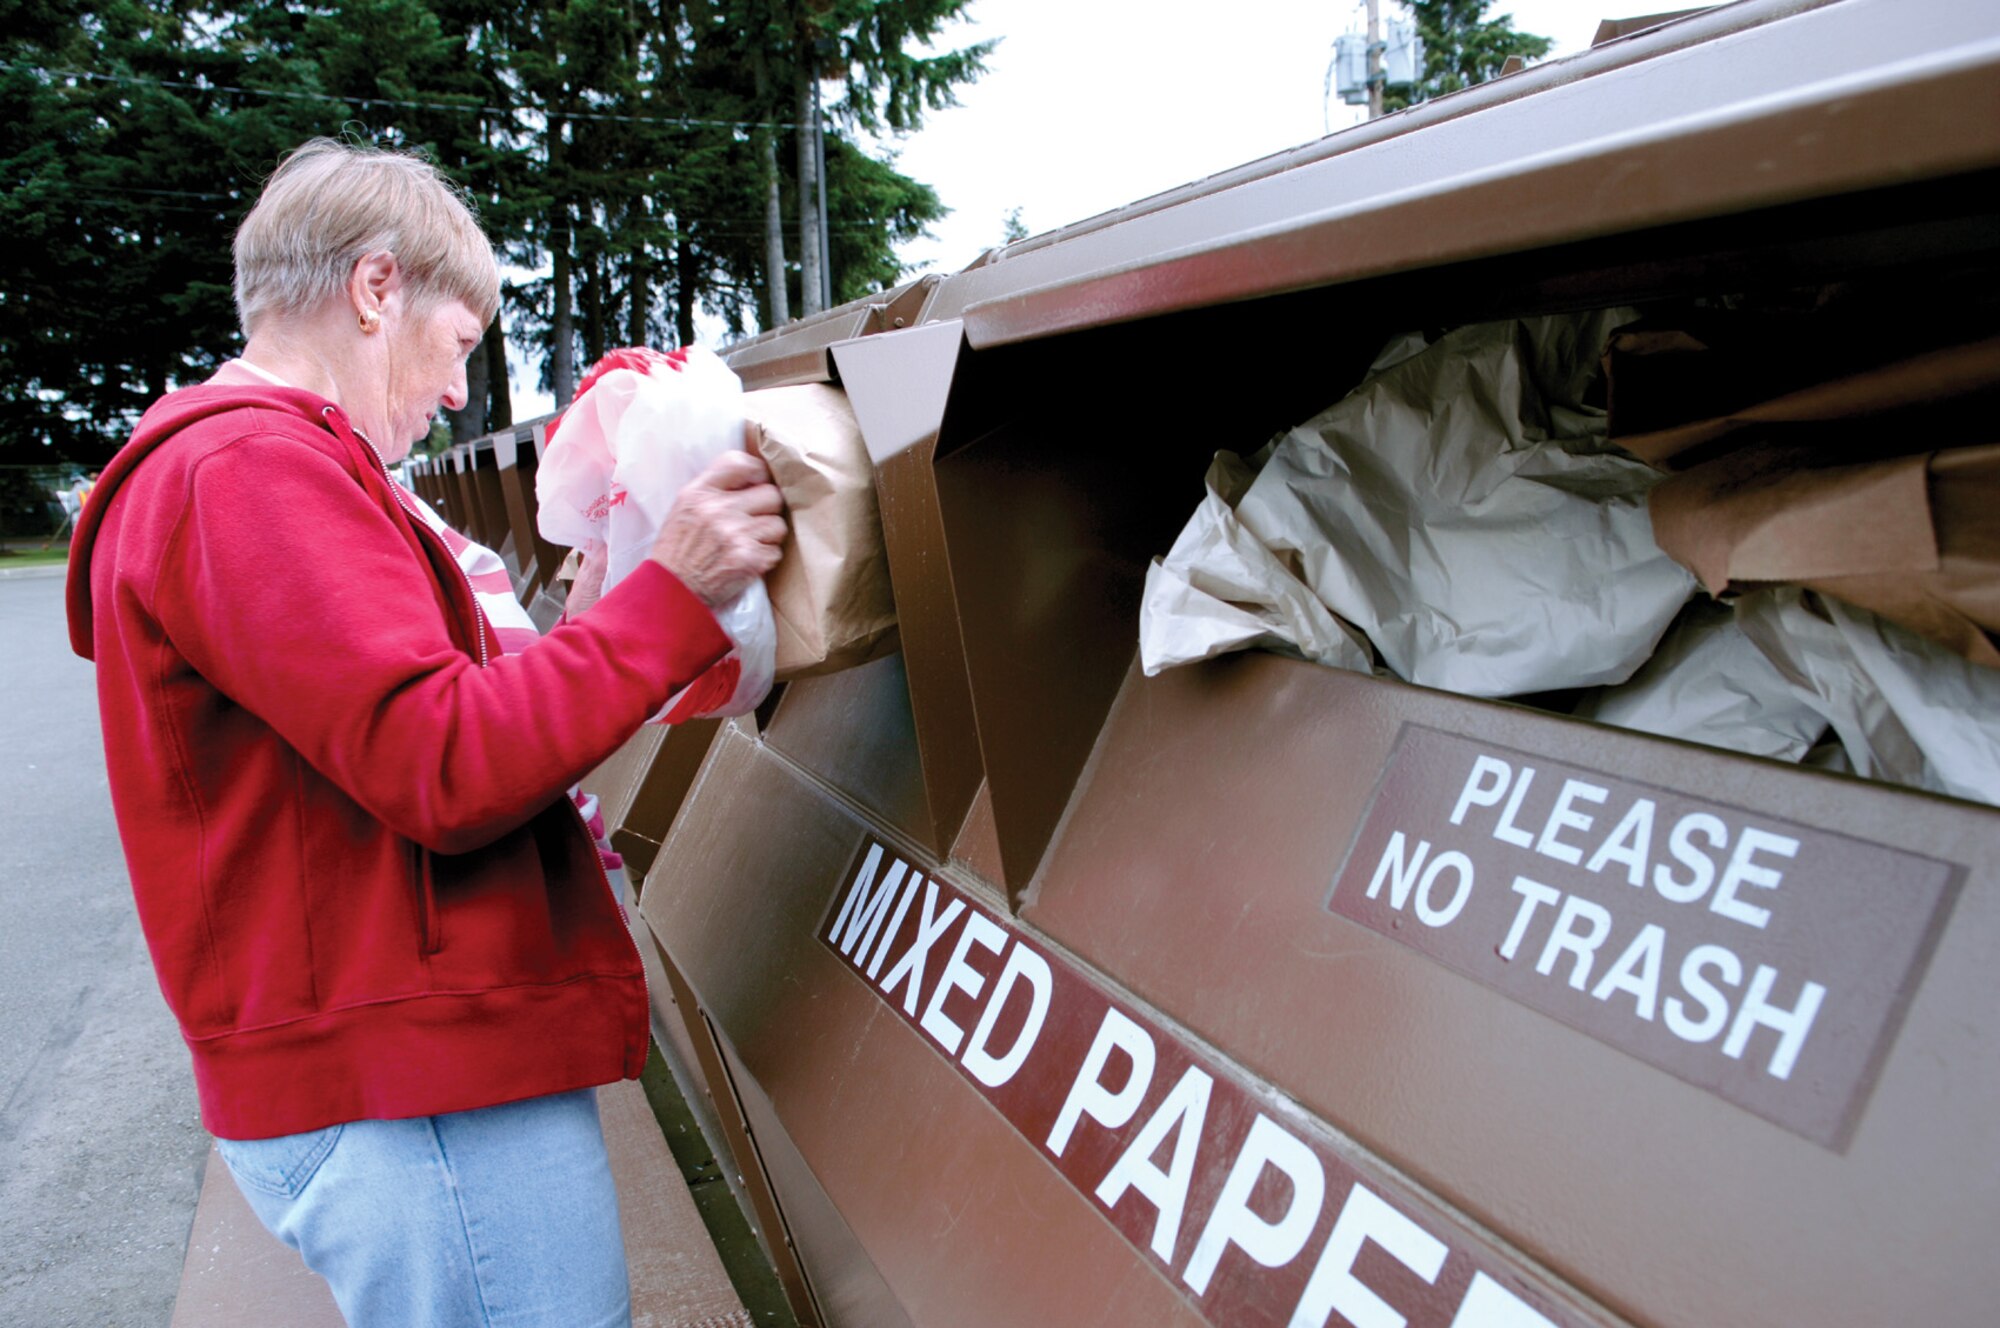 MCCHORD AIR FORCE BASE, Wash. -- Eva Carmona, a regular visitor to McChord's recycling center, places paper products into one of several containers located in the center's parking lot, June 18. (U.S. Air Force photo/Abner Guzman)